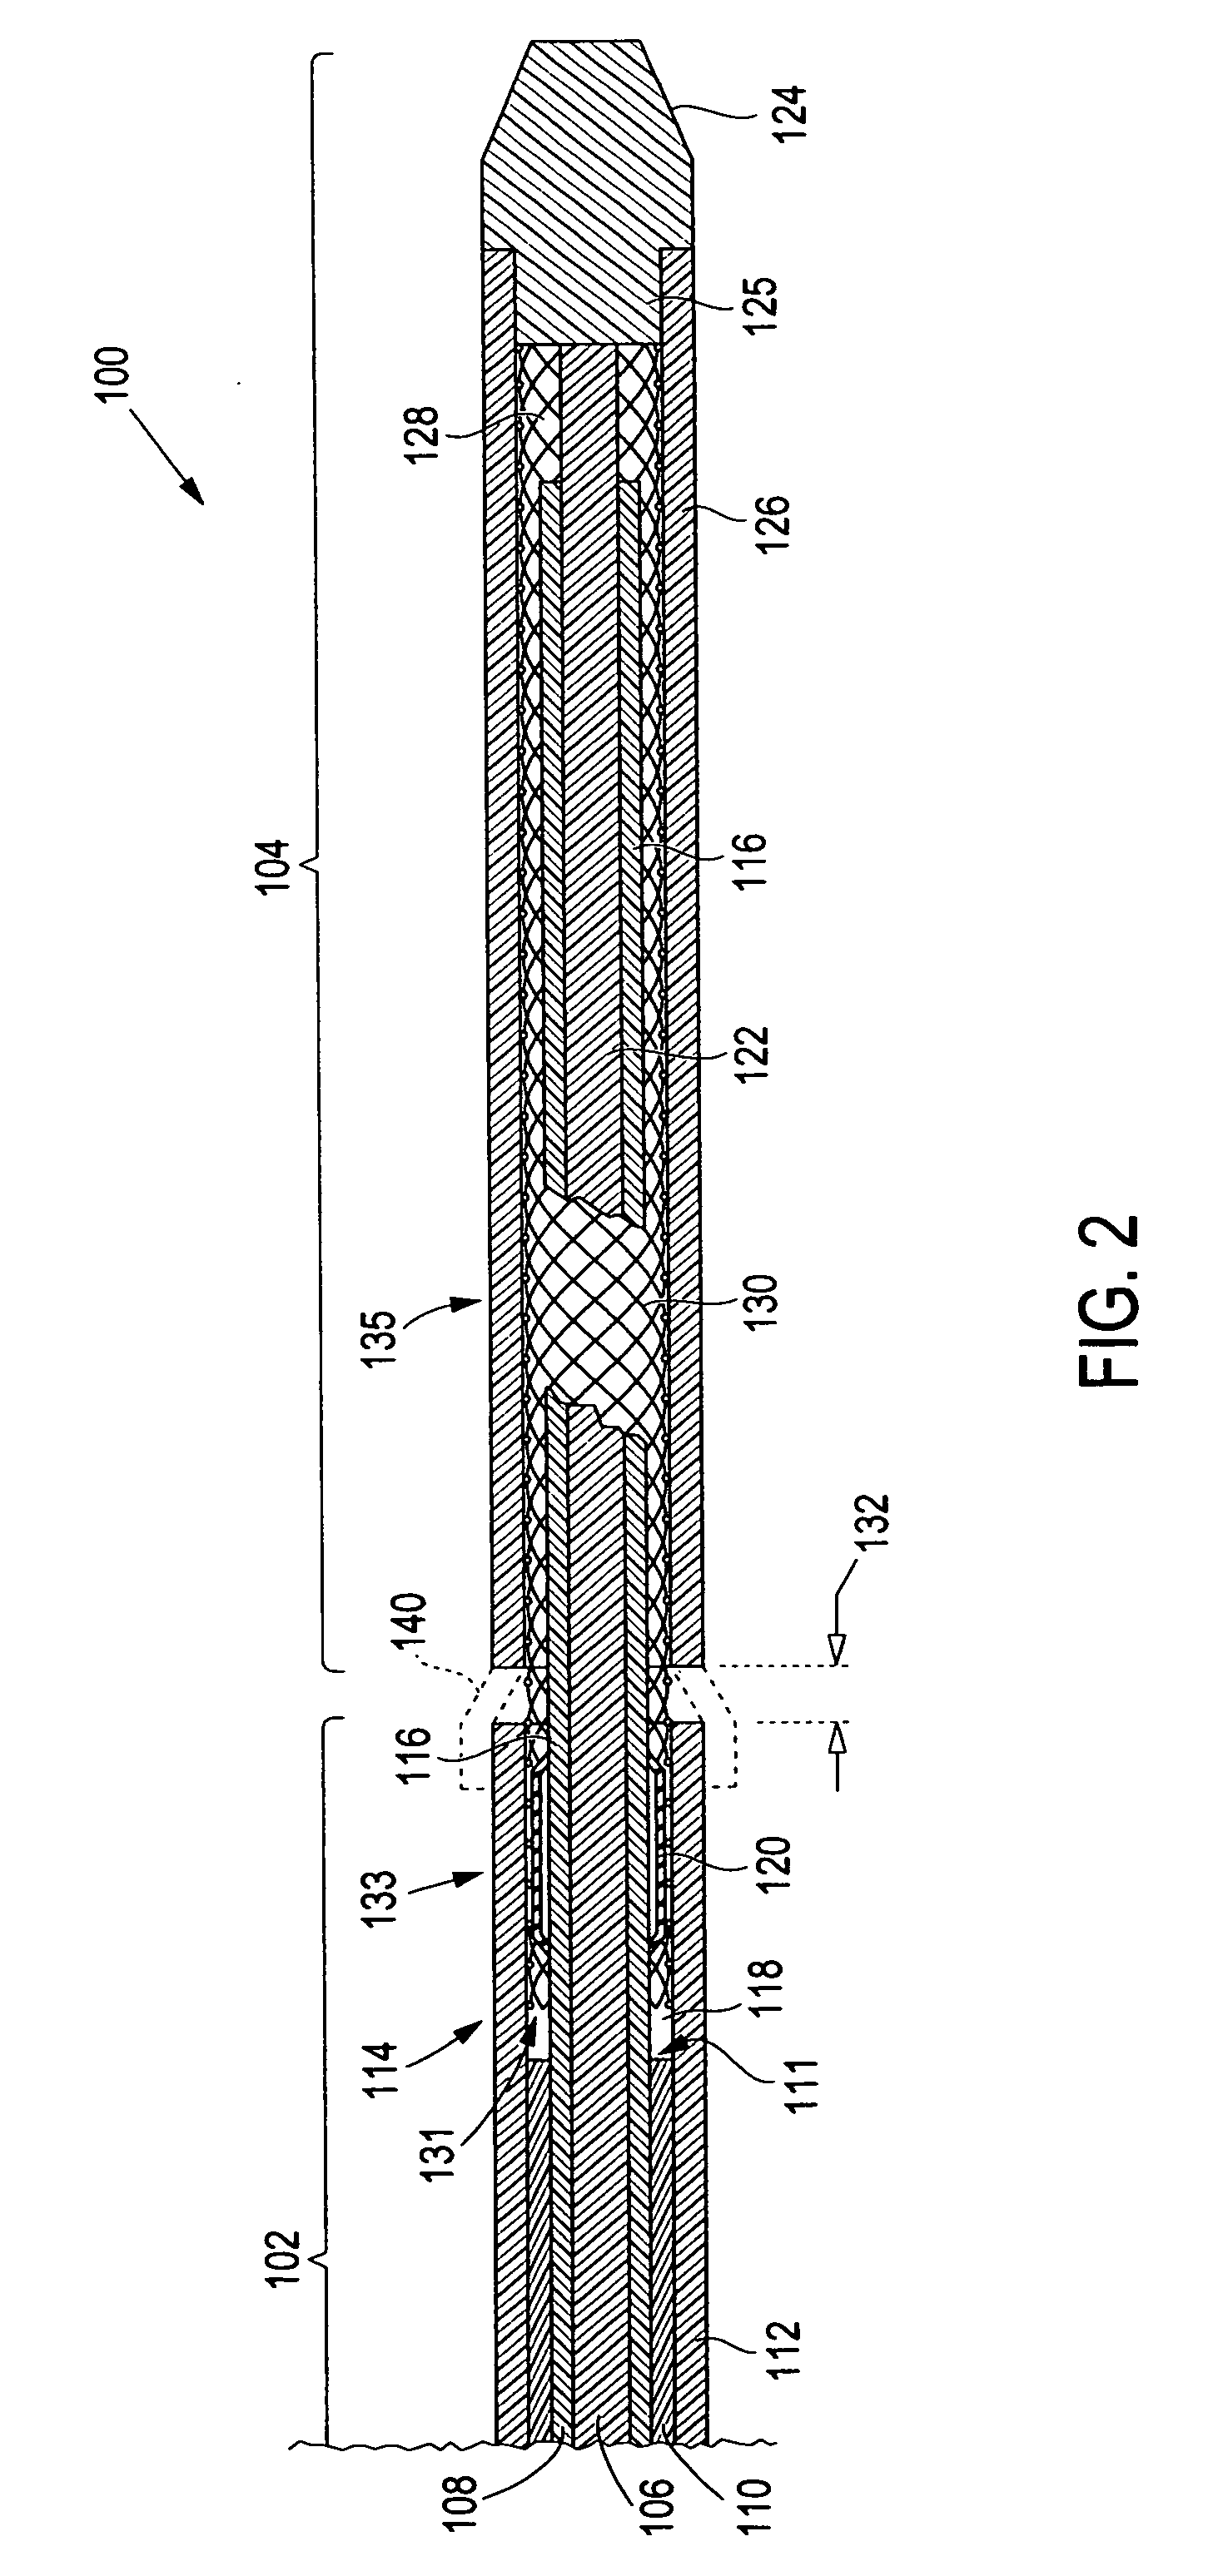 Method and apparatus for deployment of an endoluminal device